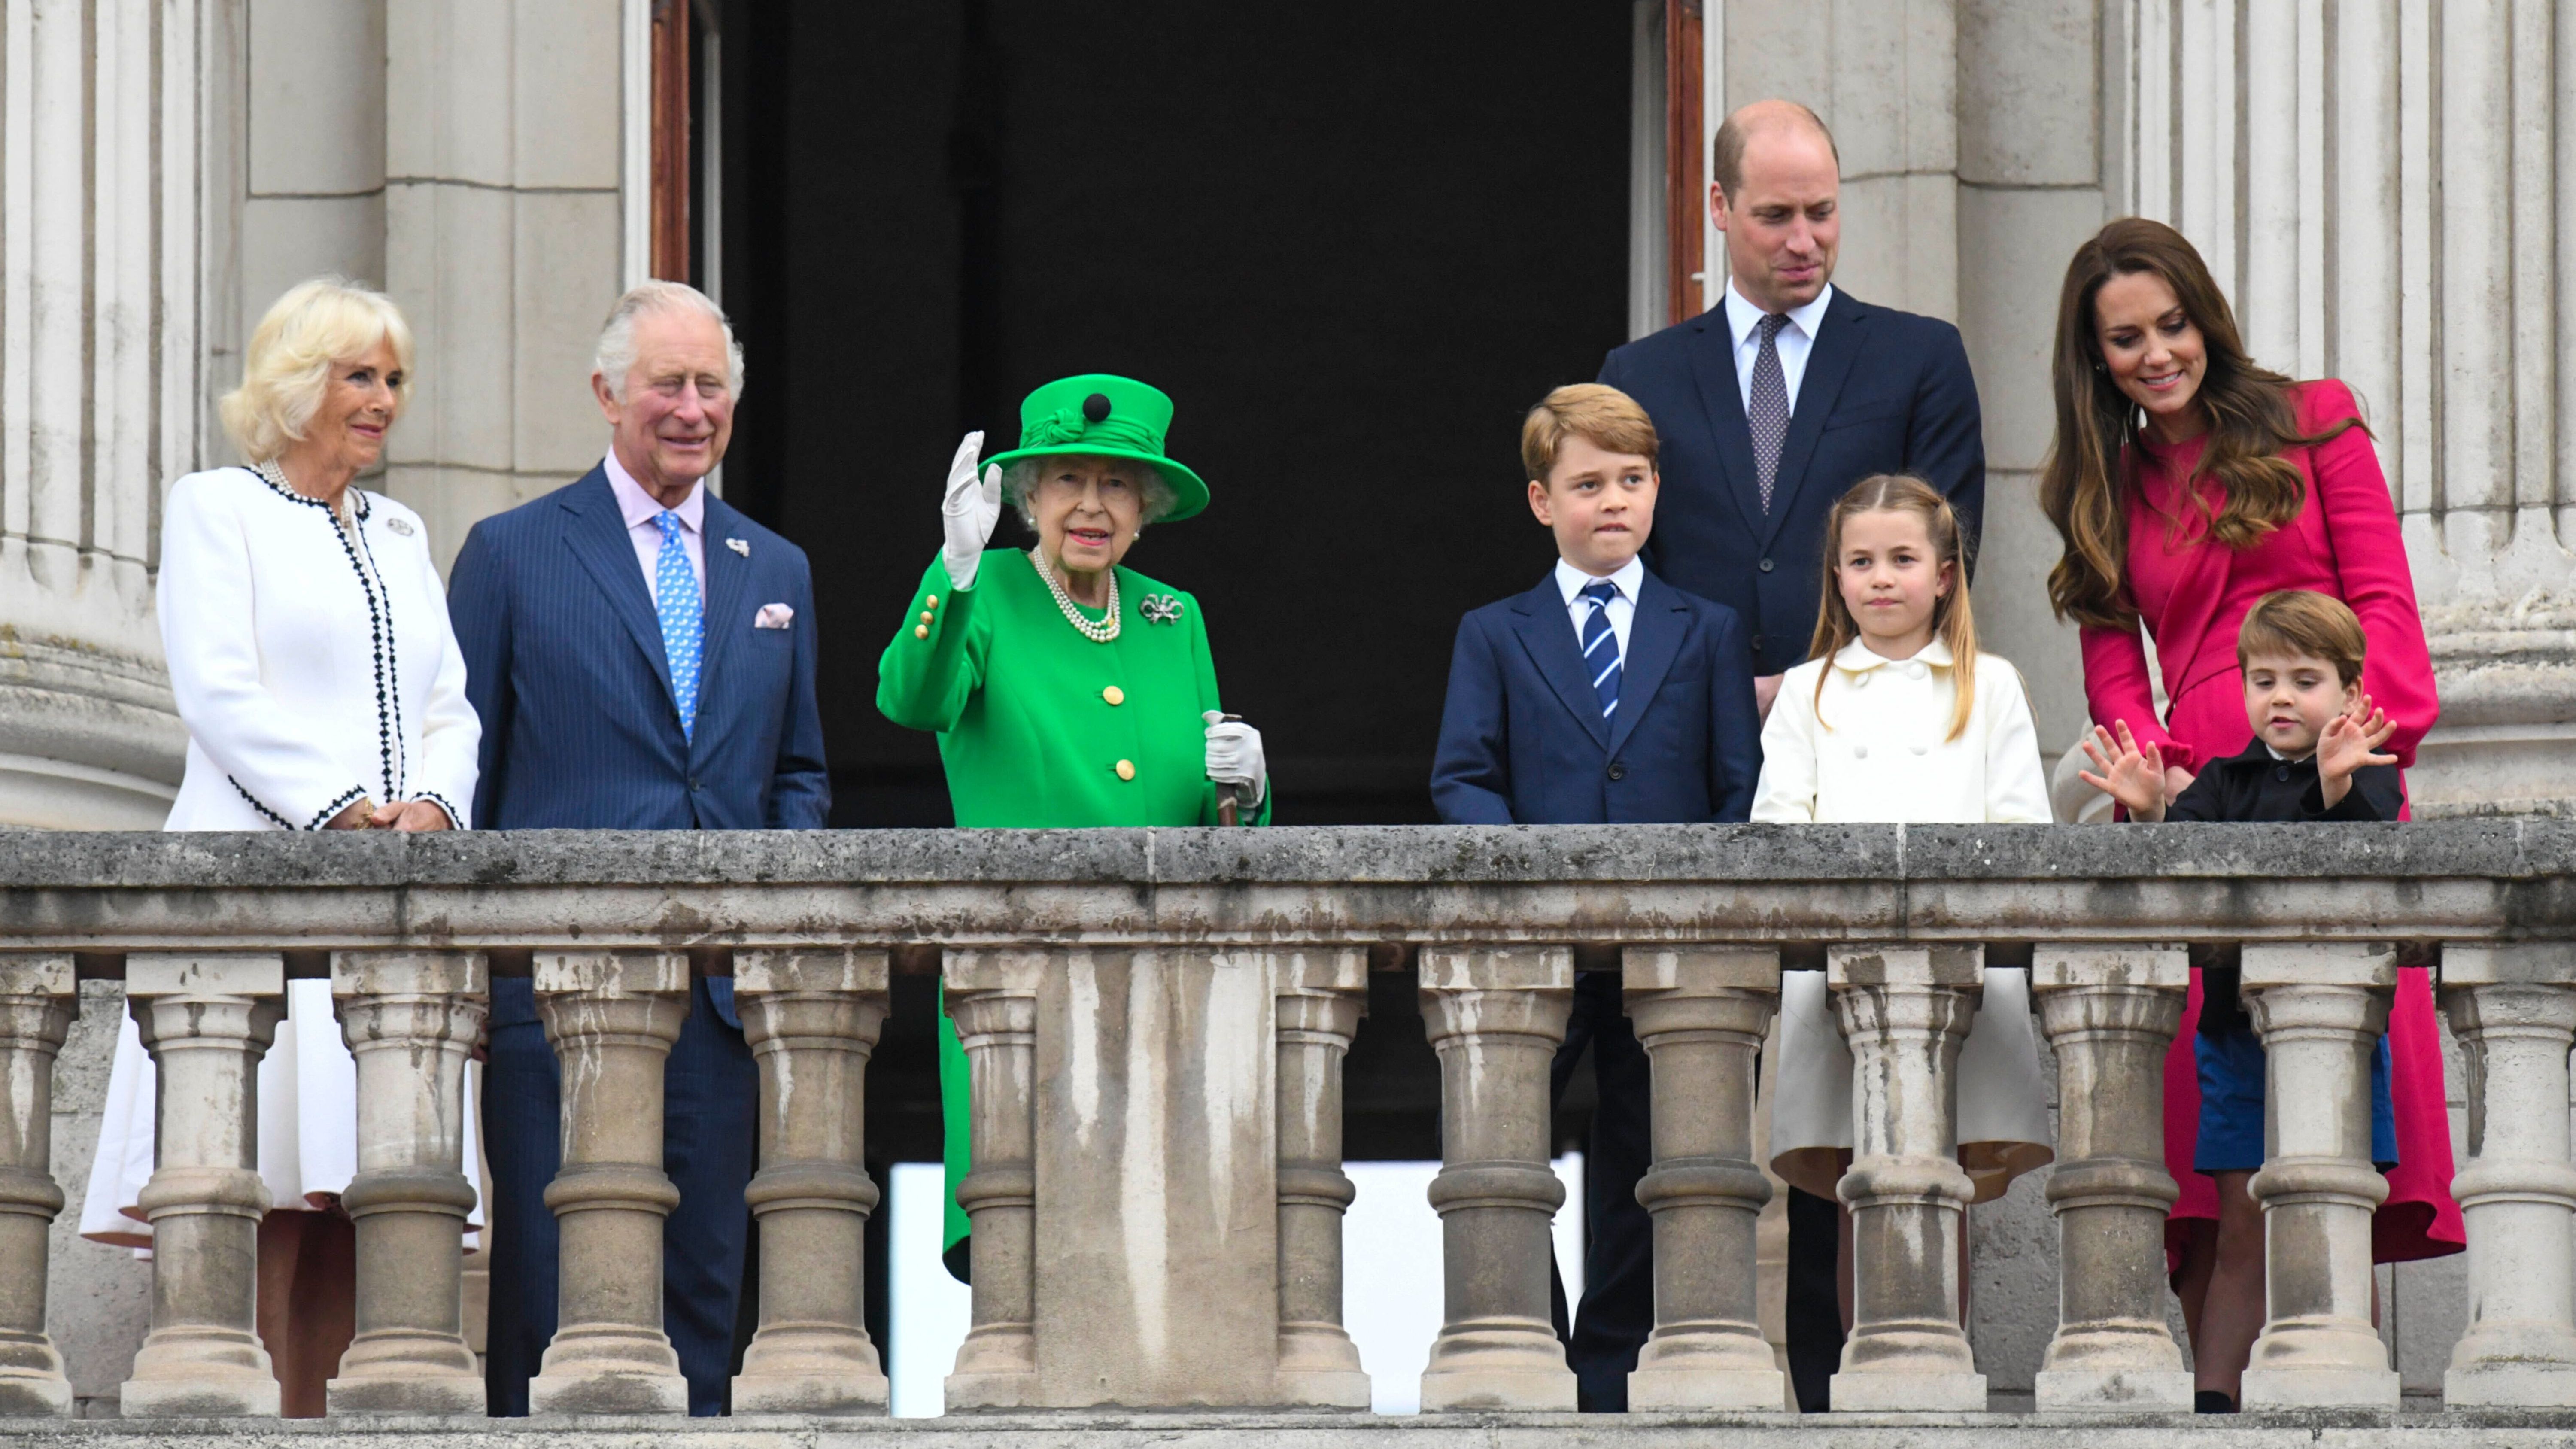 From left, Camilla, Duchess of Cornwall Prince Charles, Queen Elizabeth II, Prince George, Prince William, Princess Charlotte, Prince Louis and Kate, Duchess of Cambridge stand on the balcony, at the end of the Platinum Jubilee Pageant held outside Buckingham Palace